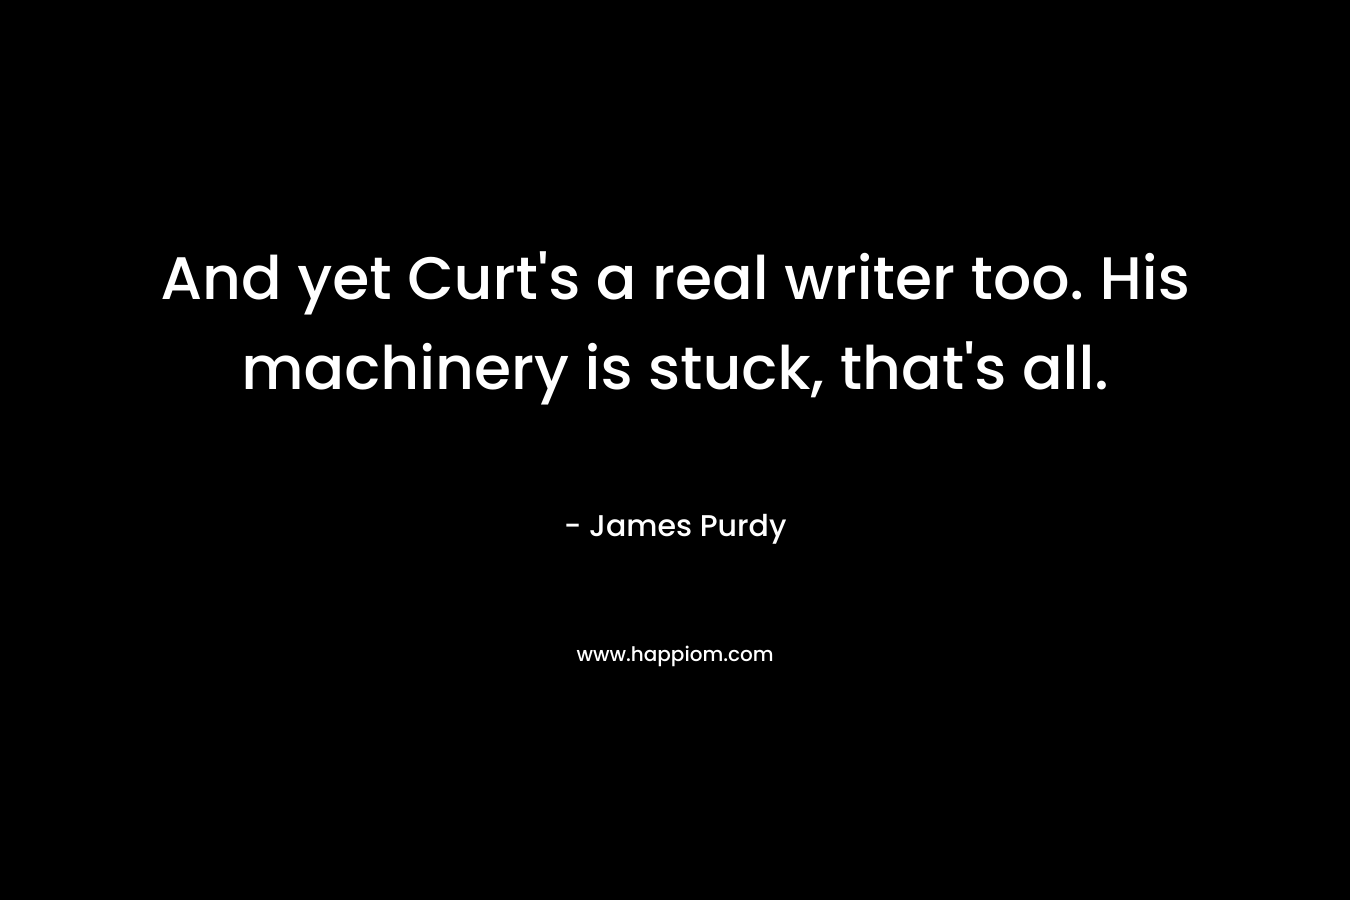 And yet Curt’s a real writer too. His machinery is stuck, that’s all. – James Purdy